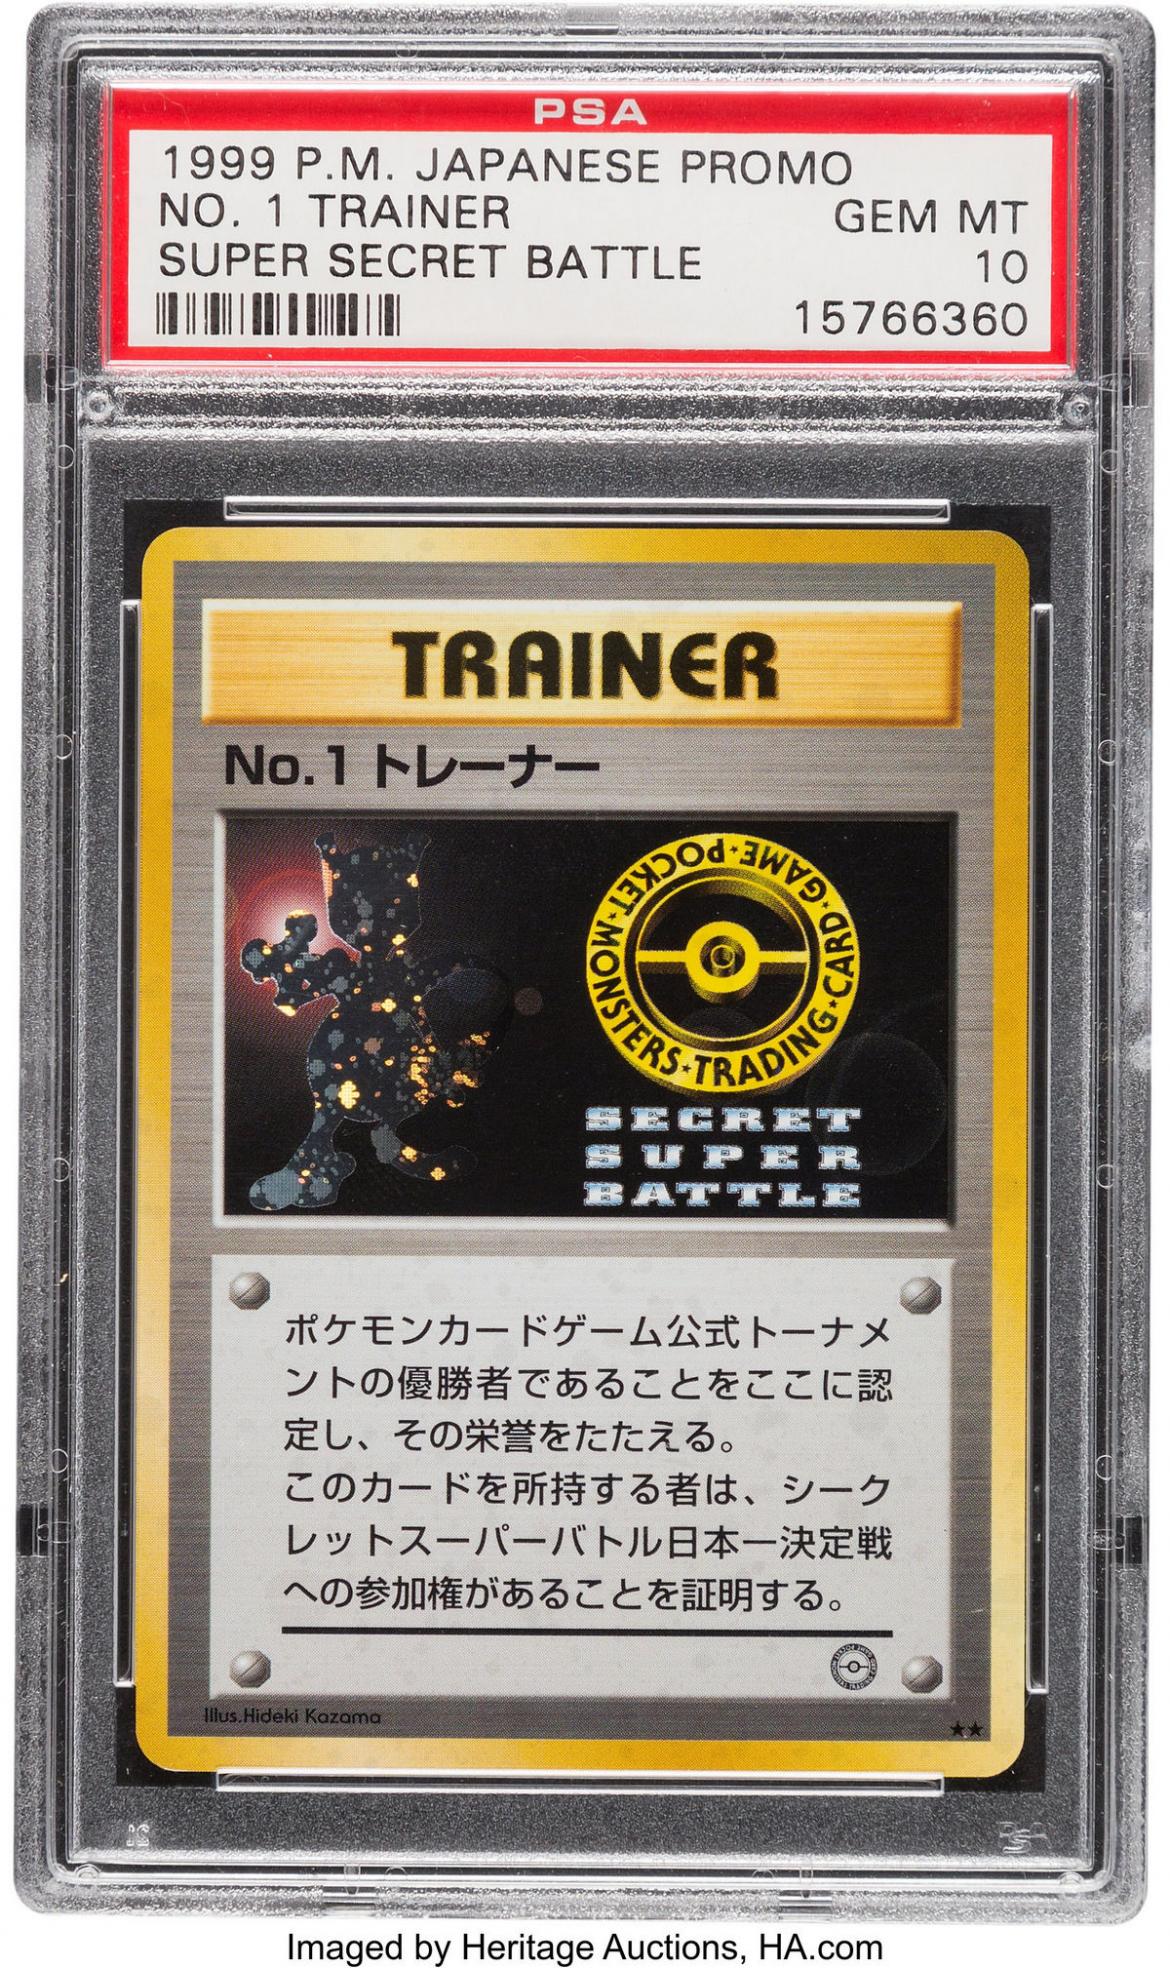 this-extremely-rare-pok-mon-trainer-card-is-expected-to-sell-for